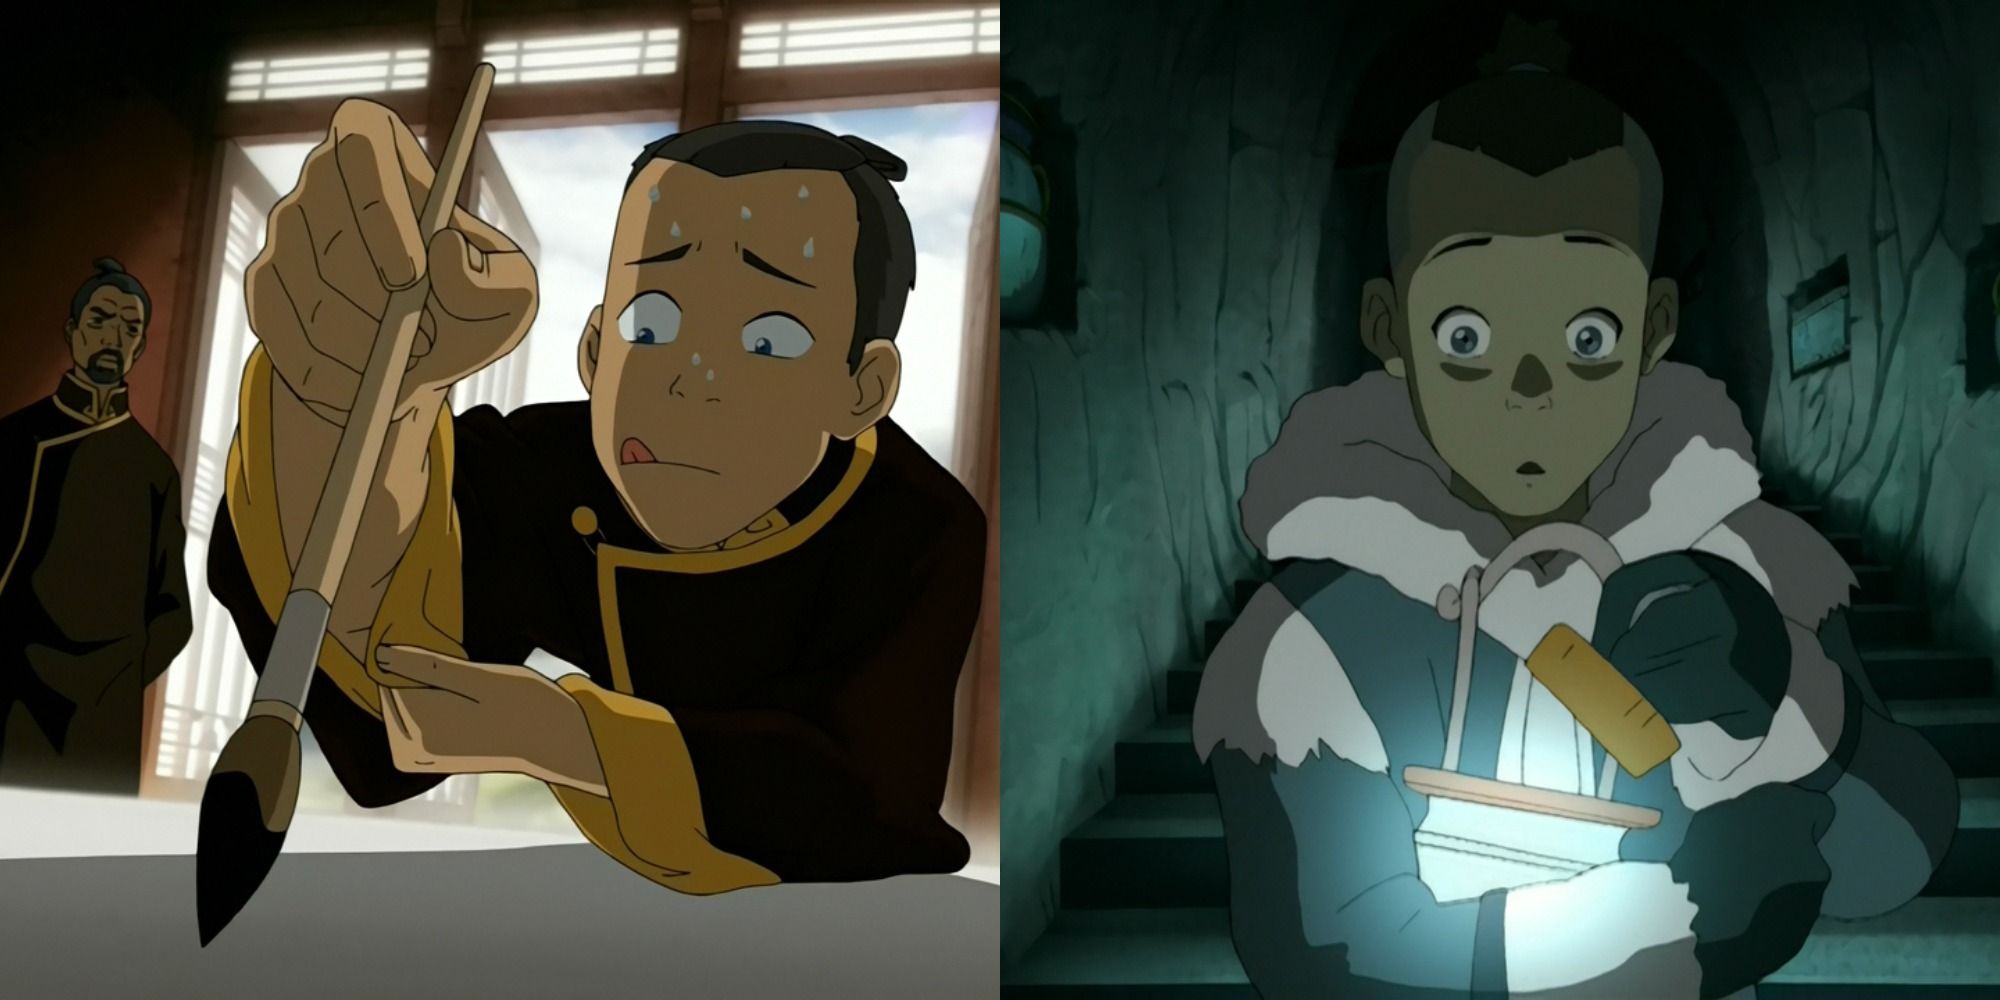 Split image showing Sokka struggling, and him looking confused in Avatar: The Last Airbender